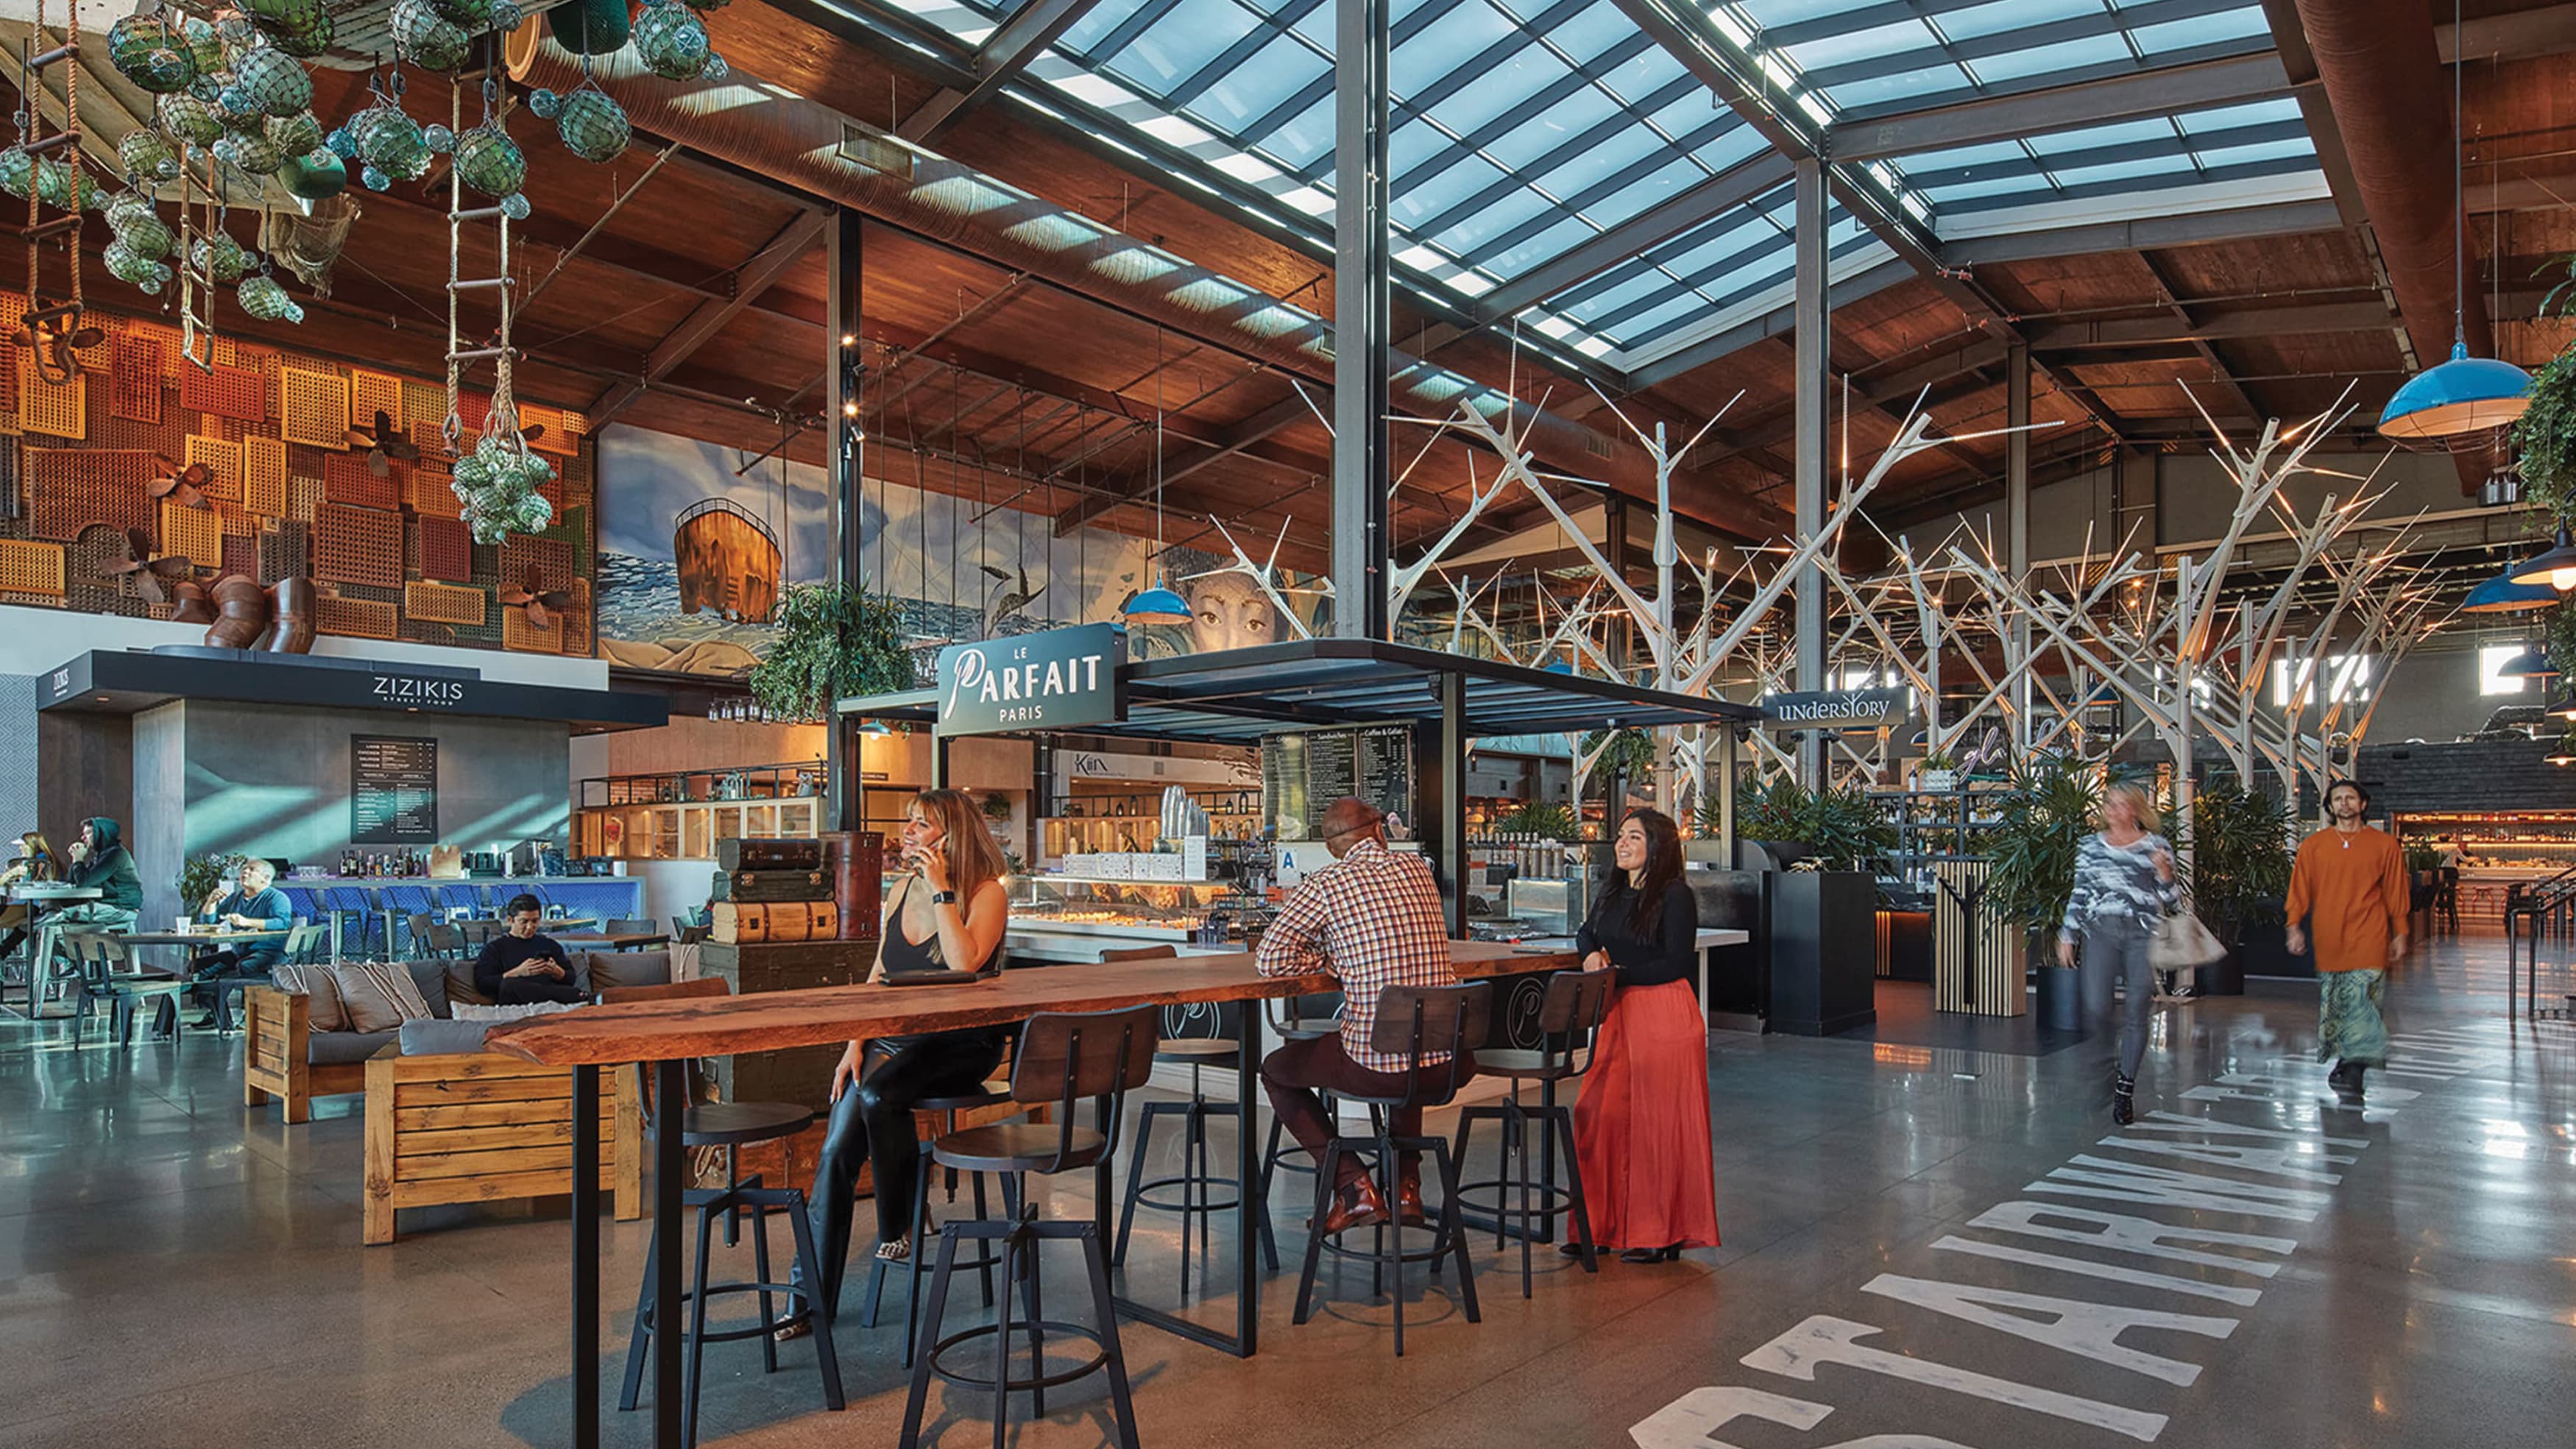 Eclectic food hall with large skylight window, exposed wood ceiling, tables, and sculptural elements for as creative placemaking design